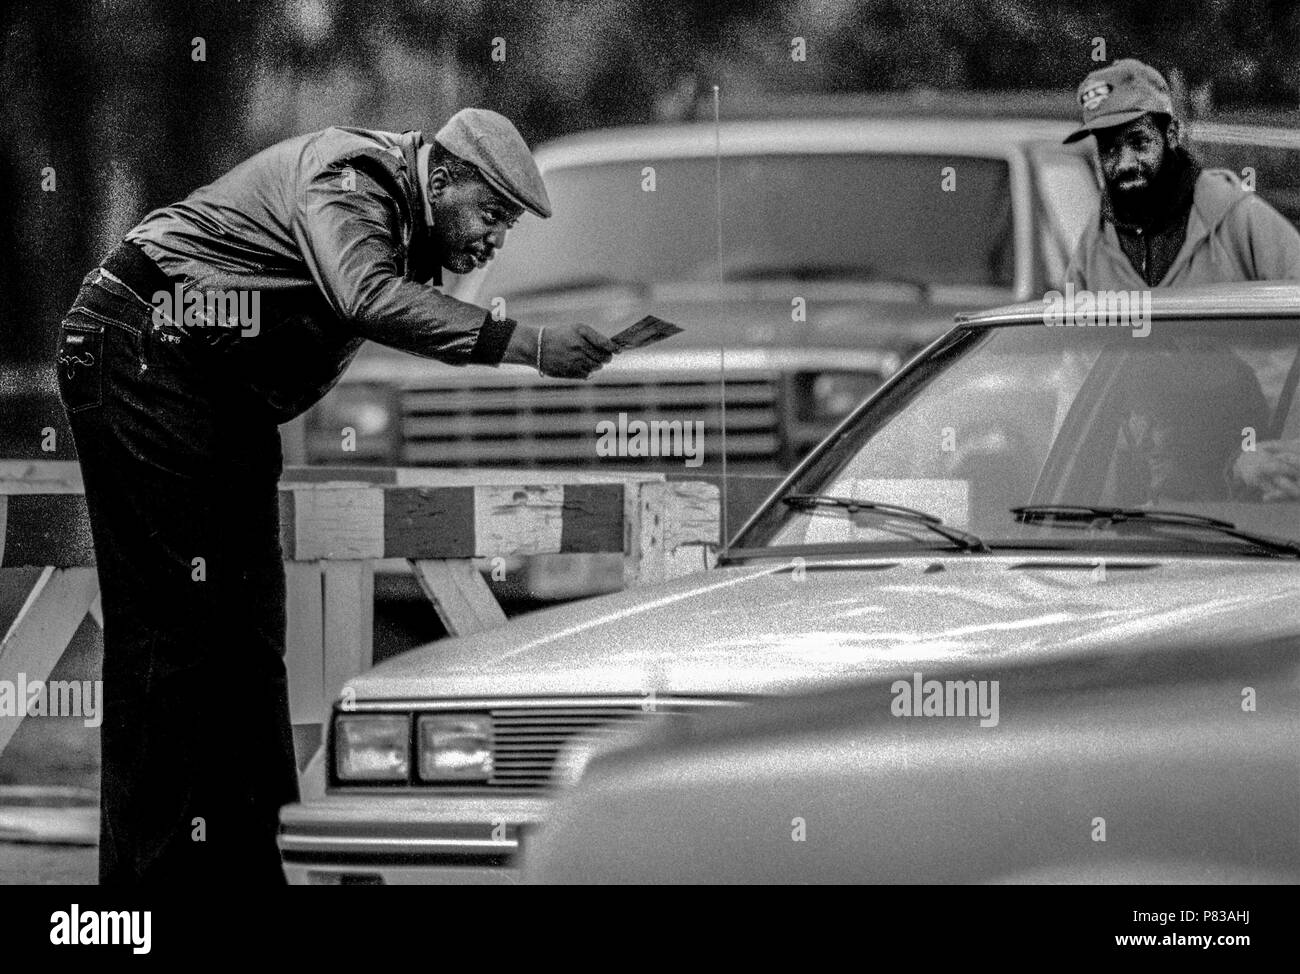 Stanford, California, USA. 20th Jan, 1985. Ticket sales at the Super Bowl XIX tailgate on the Stanford University campus. The San Francisco 49ers defeated the Miami Dolphins 38-16 on Sunday, January 20, 1985. Credit: Al Golub/ZUMA Wire/Alamy Live News Stock Photo